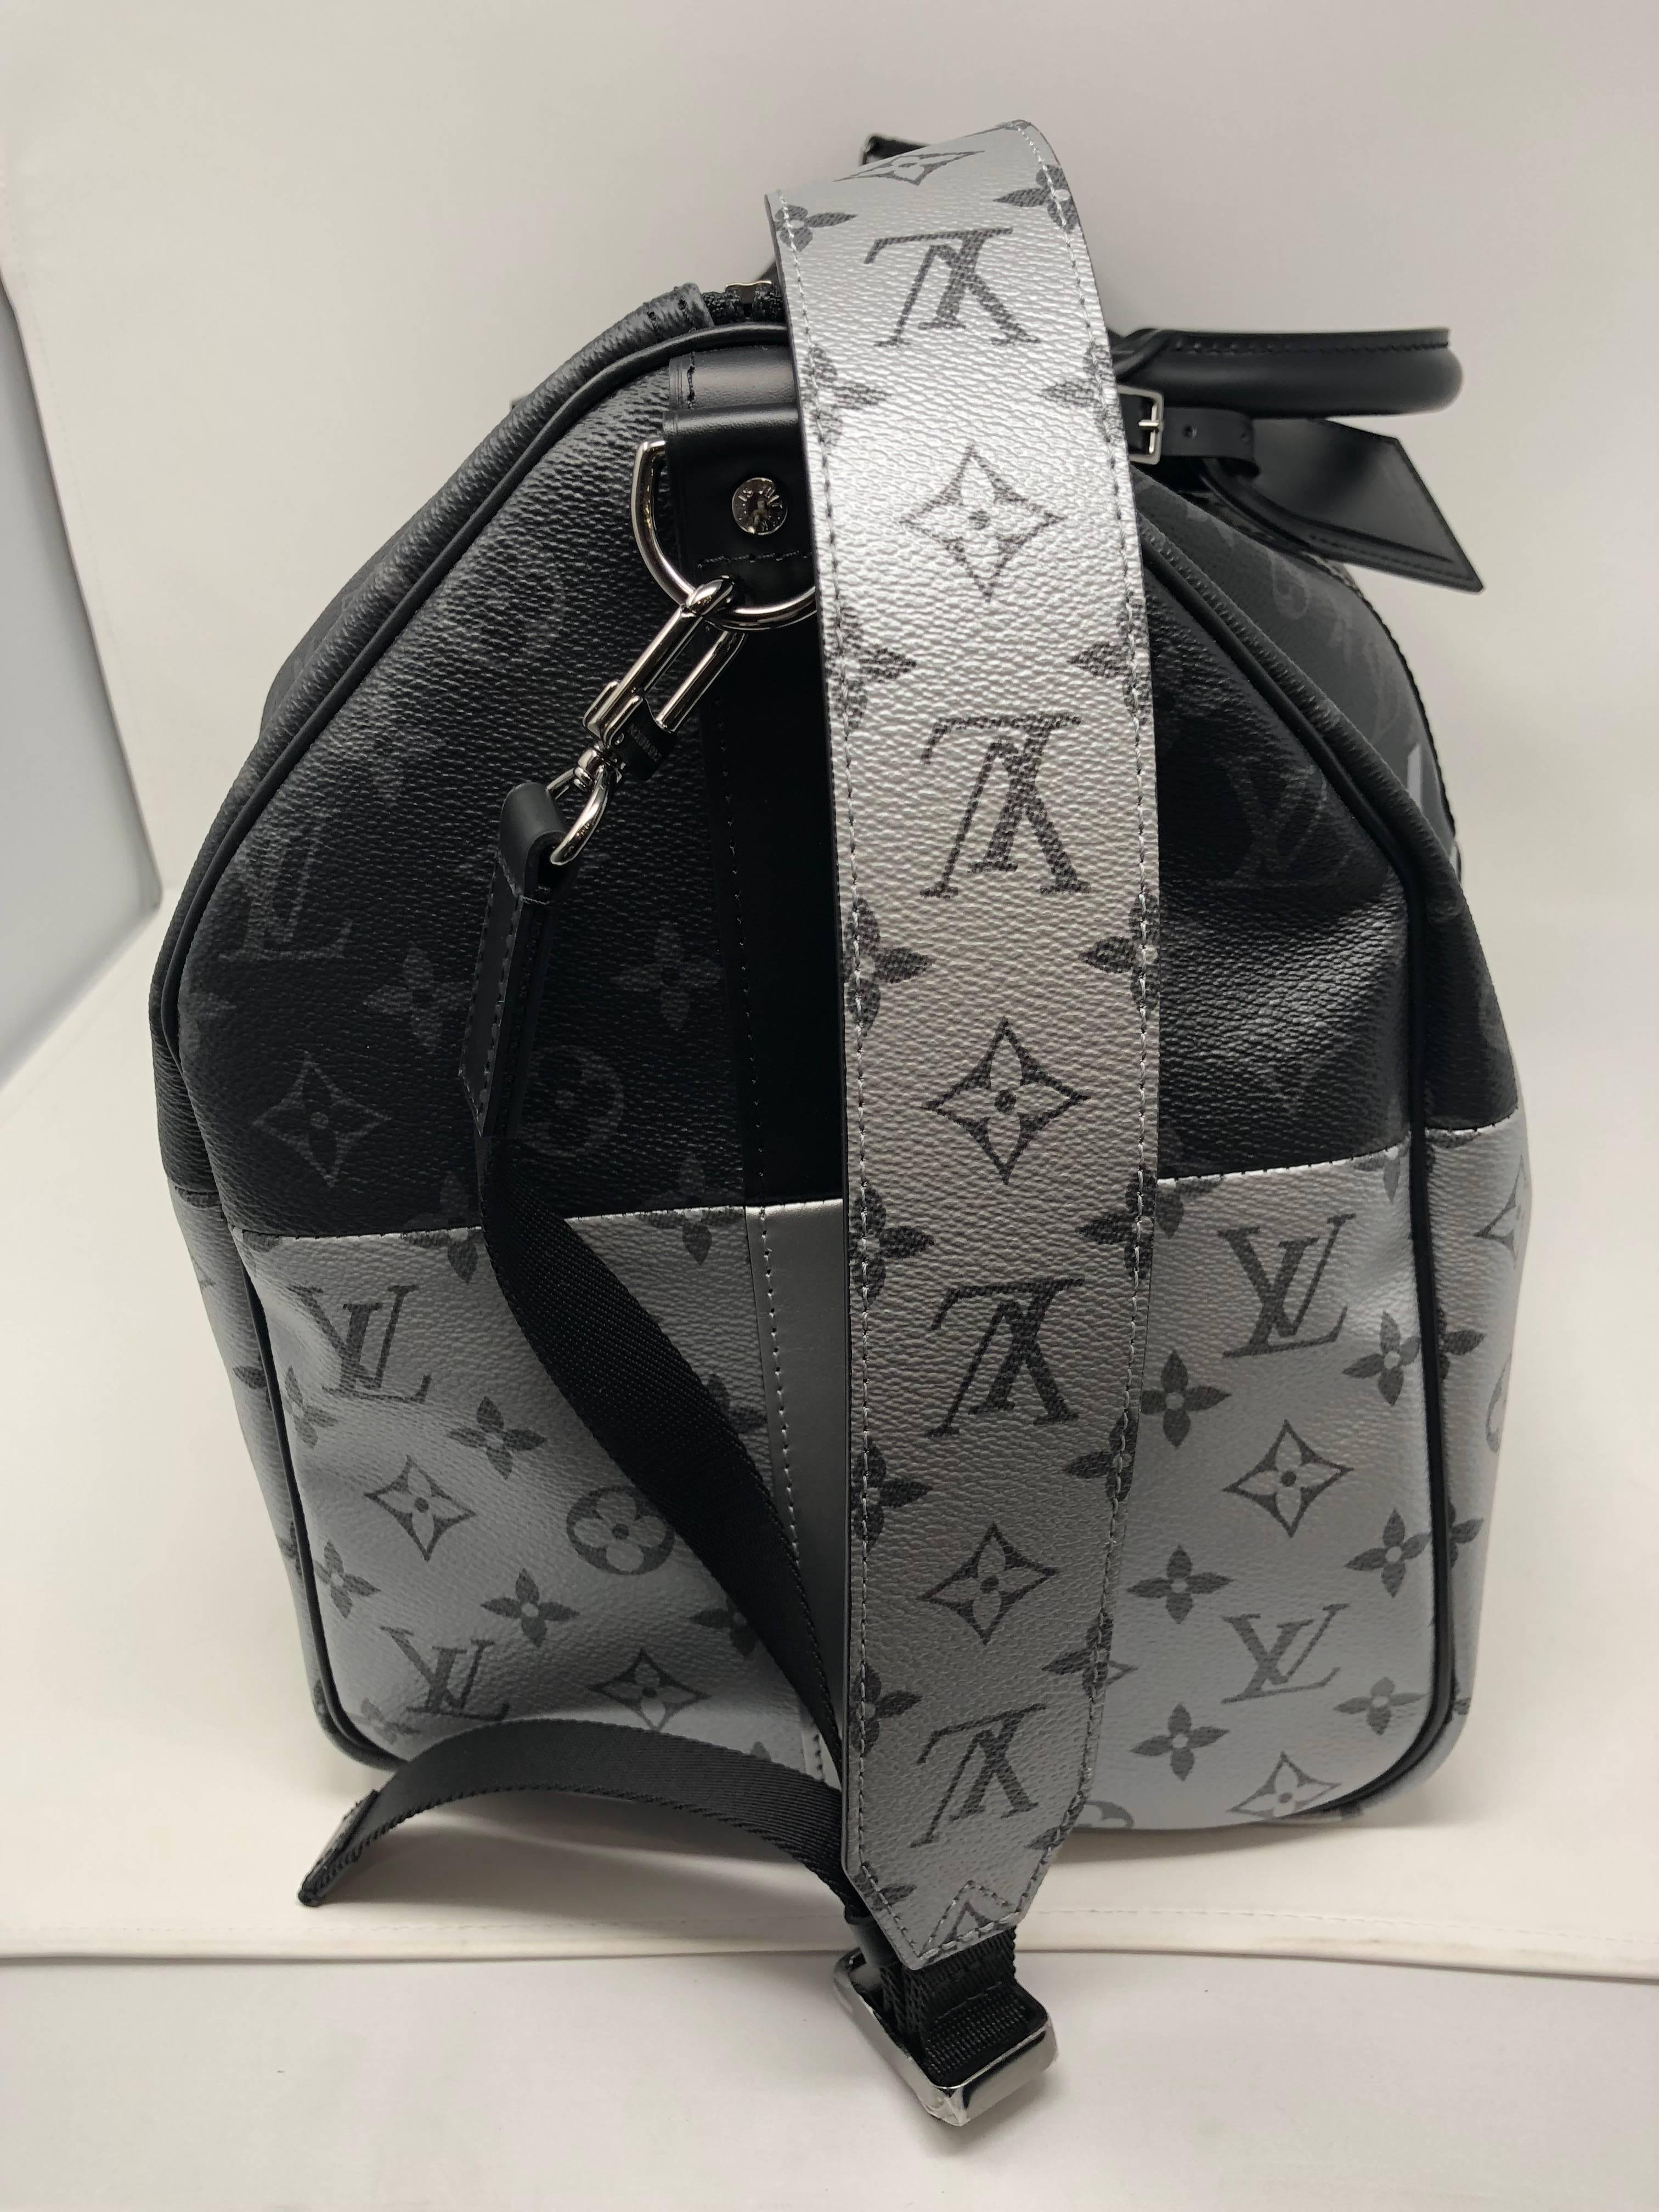 Authentic and Brand new Louis Vuitton Monogram Eclipse Split 50 Keepall Bandouliere. Coated monogram Eclipse split silver and black color. Black textile lining with cowhide leather trimming. New Spring 2018 Collection by Kim Jones and his last with